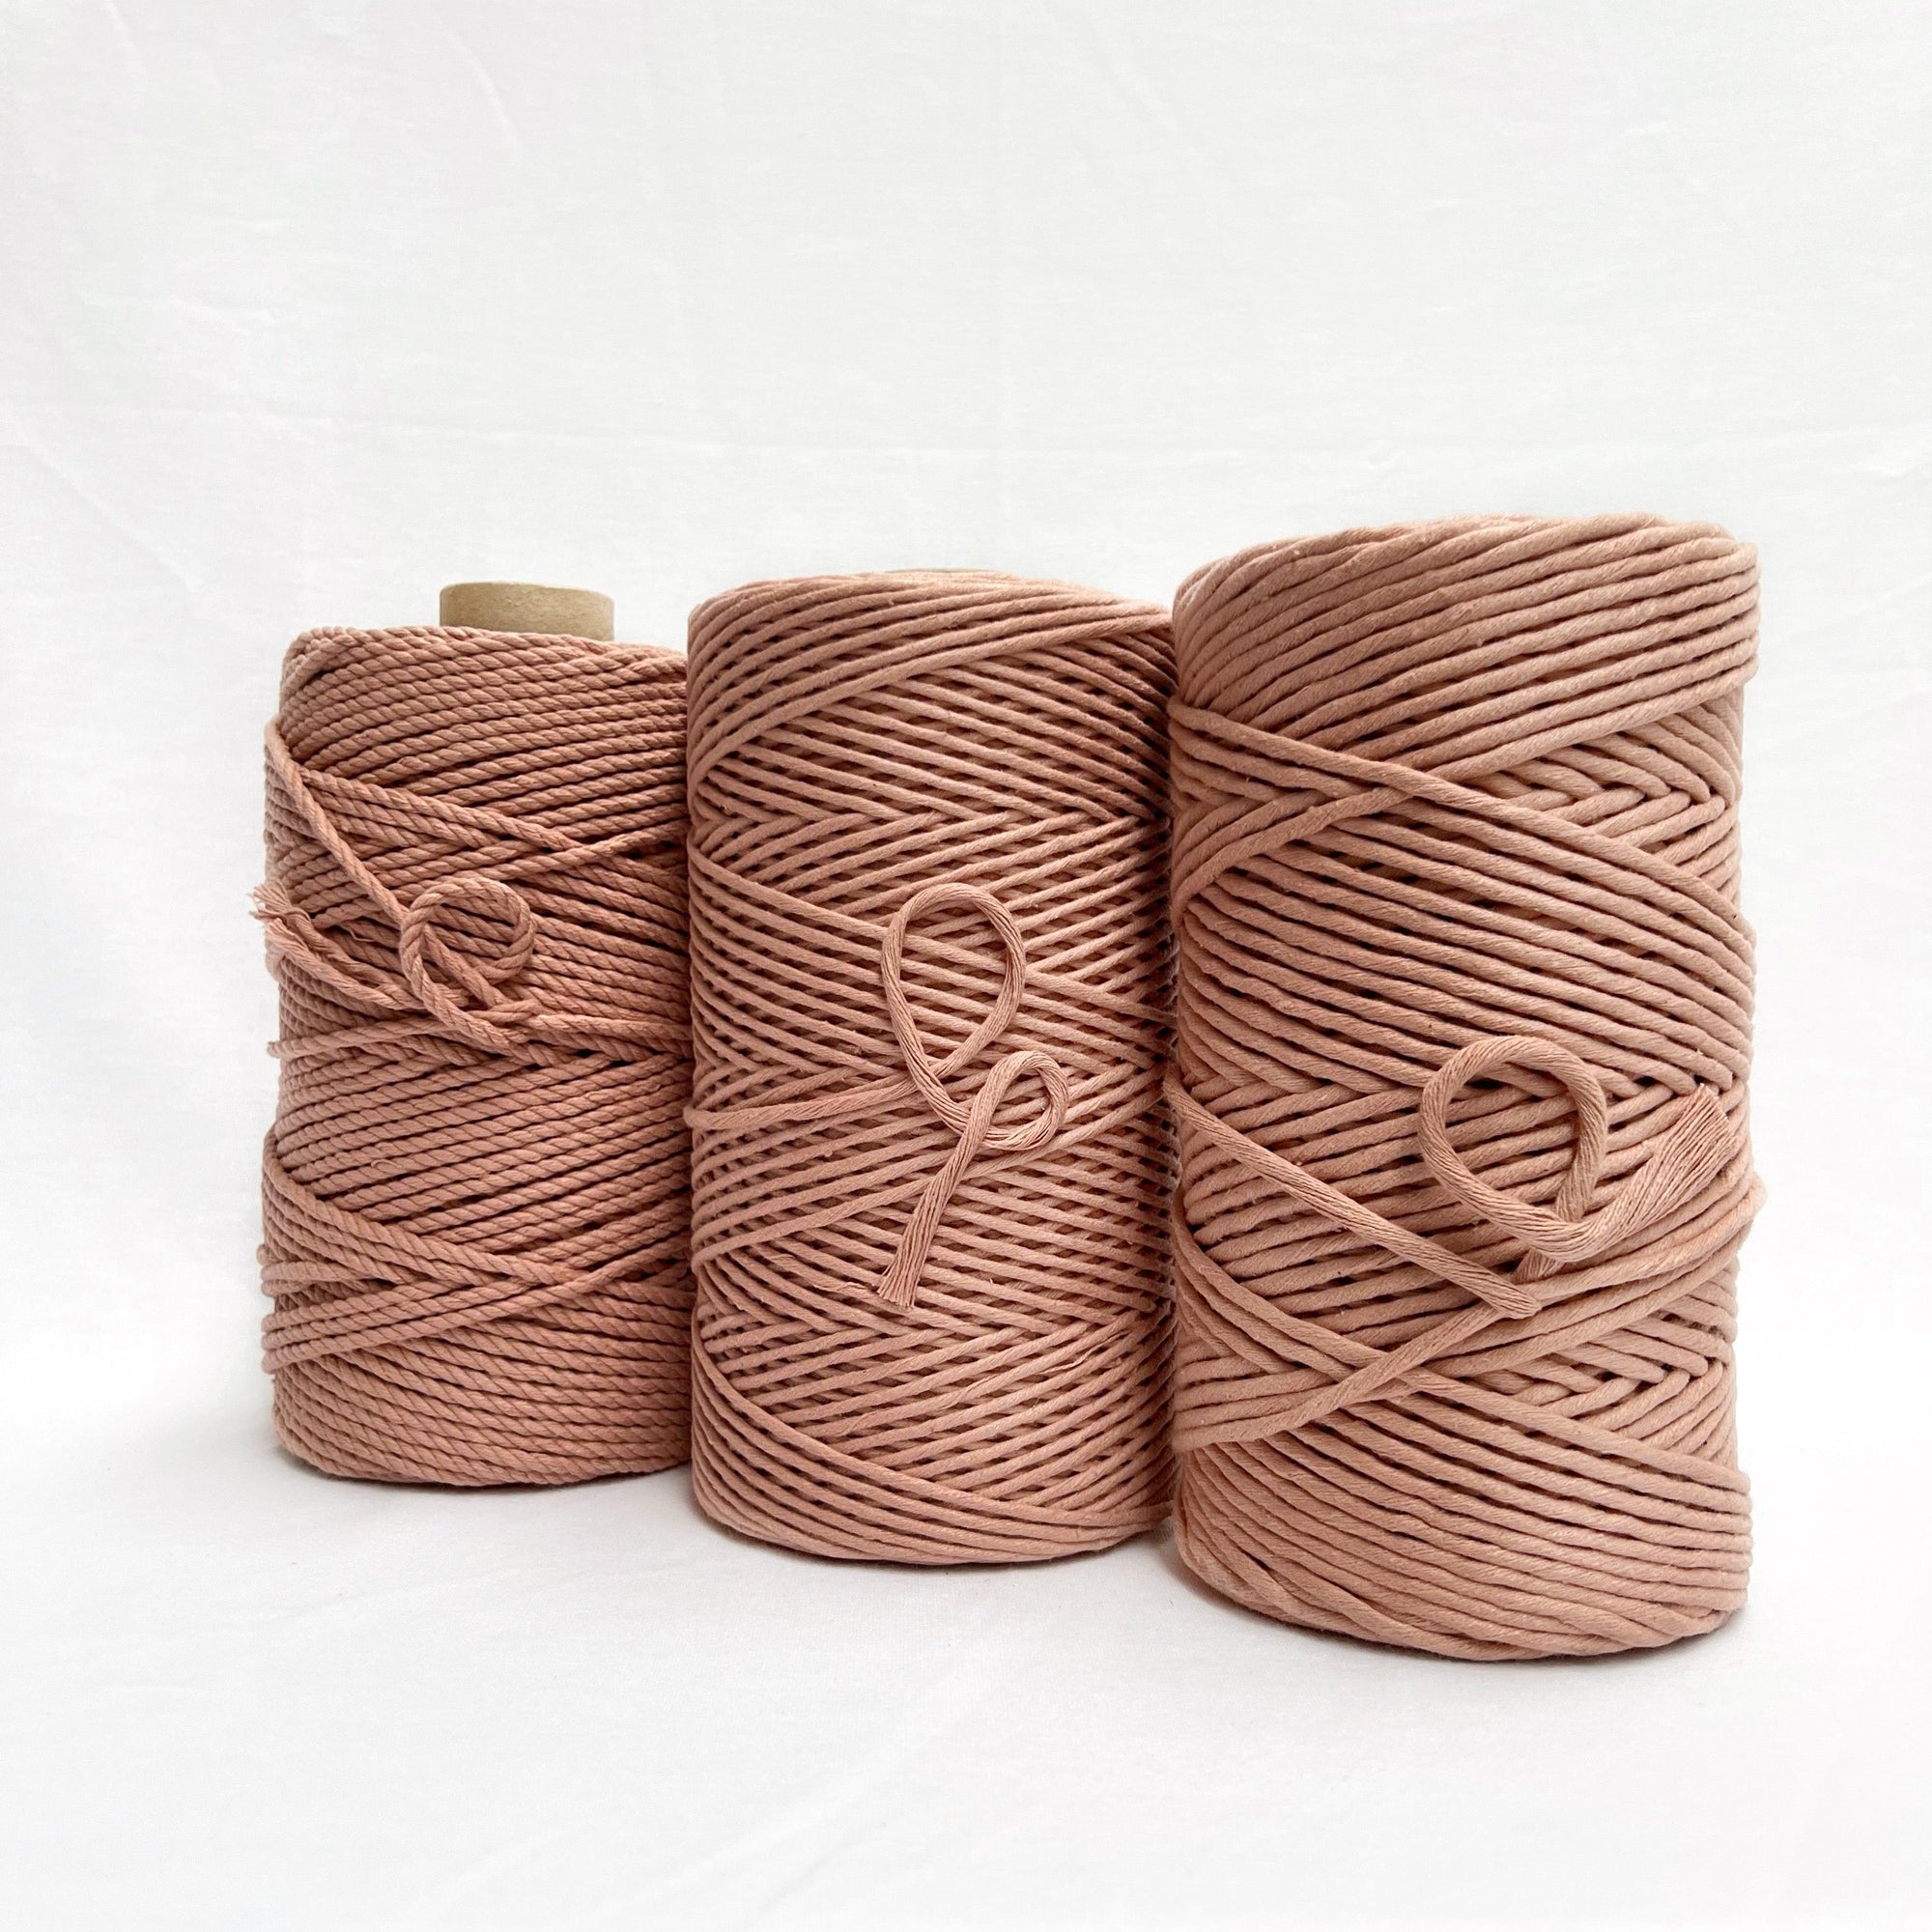 mary maker studio 1kg 4mm recycled cotton macrame rope in vintage peach colour suitable for macrame workshops beginners and advanced artists